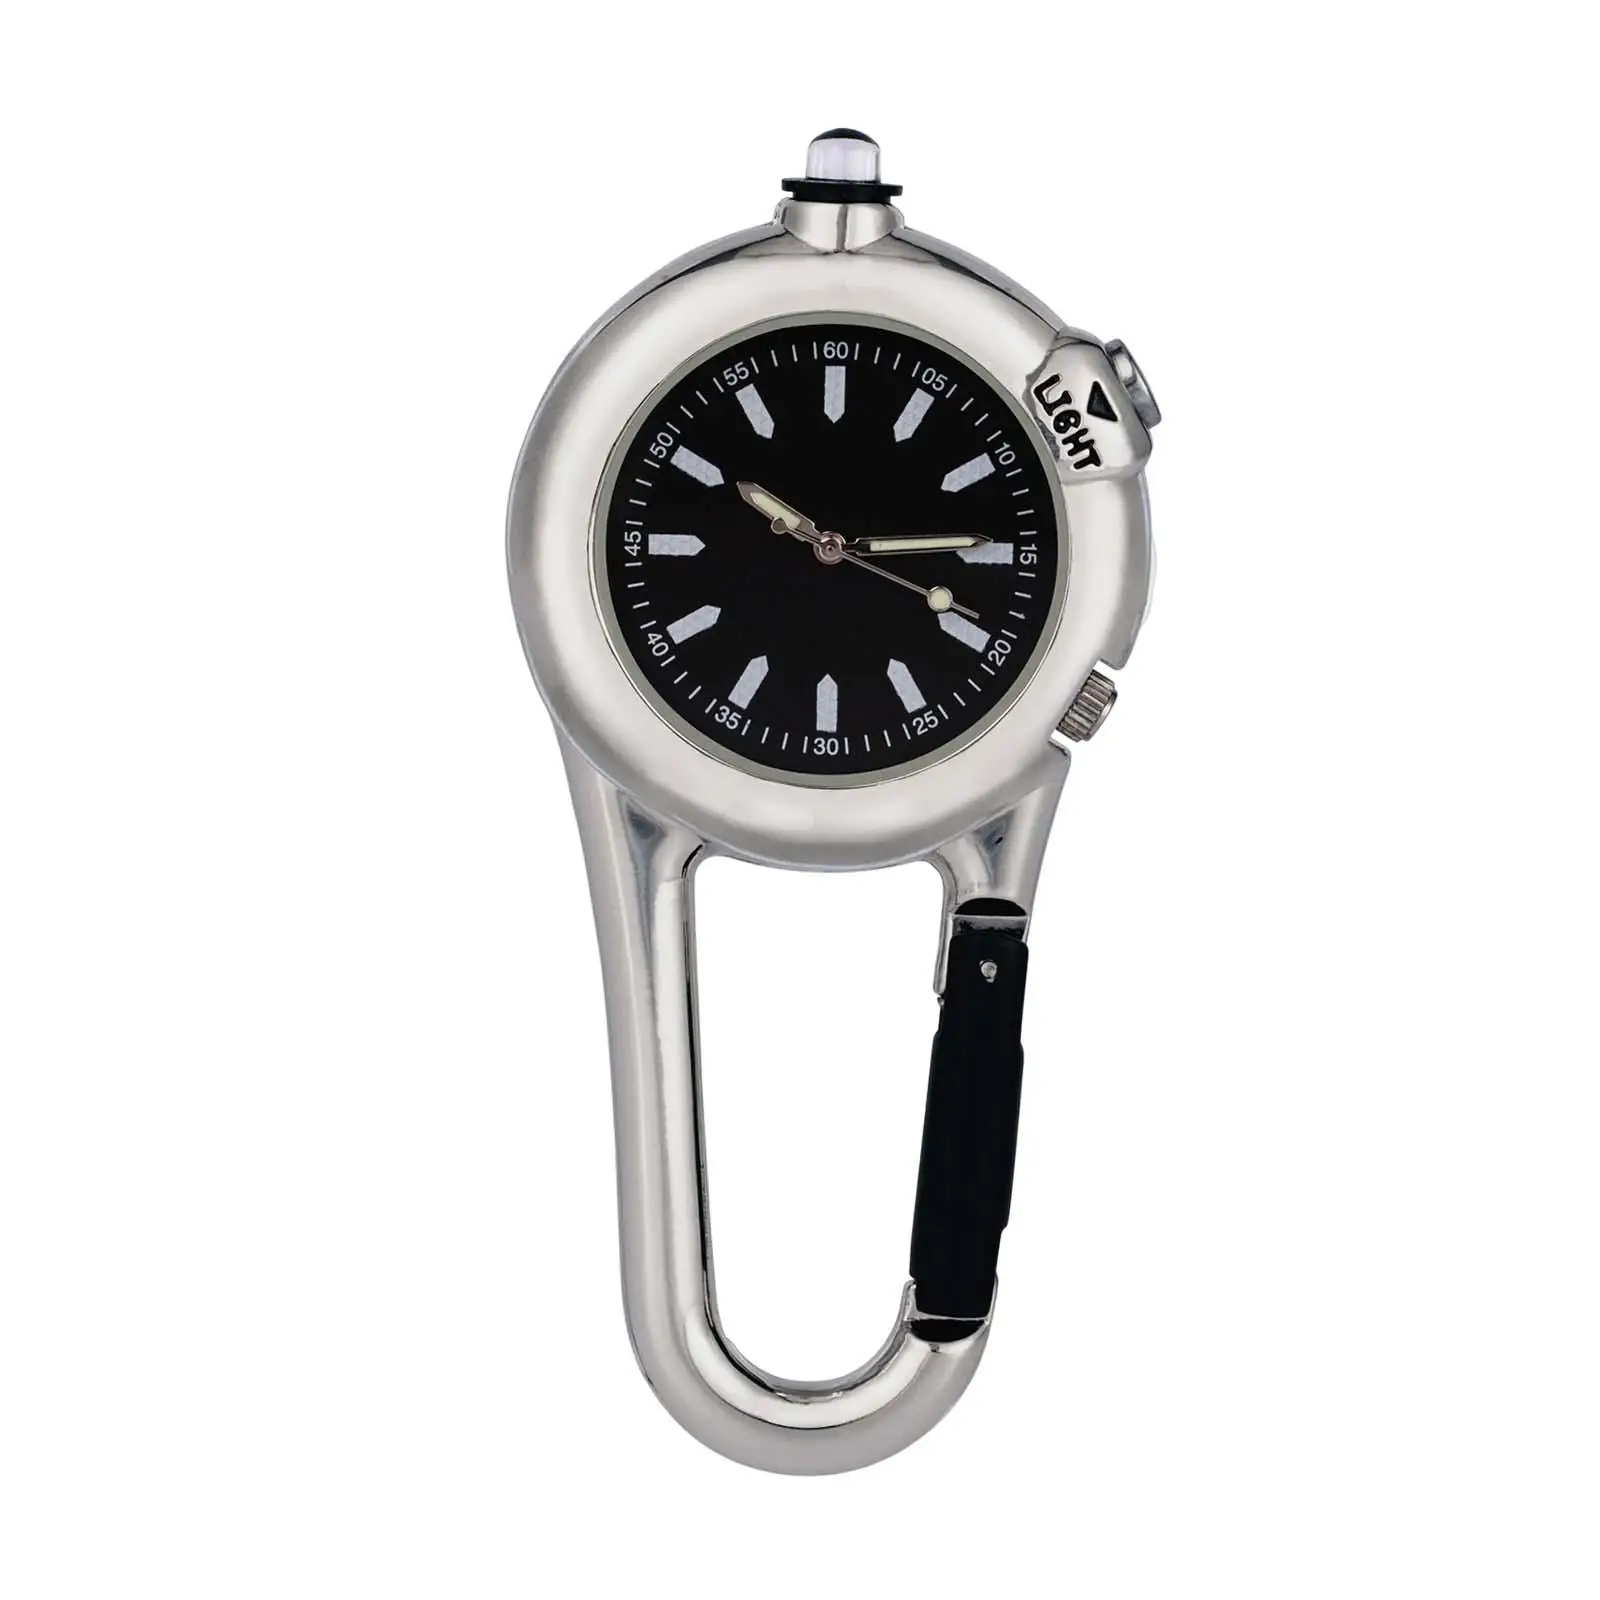 Portable Clip On Carabiner Pocket Watch Backpack Watch Unisex with Light Climbing Watch for Outdoor Camping Home Equipment